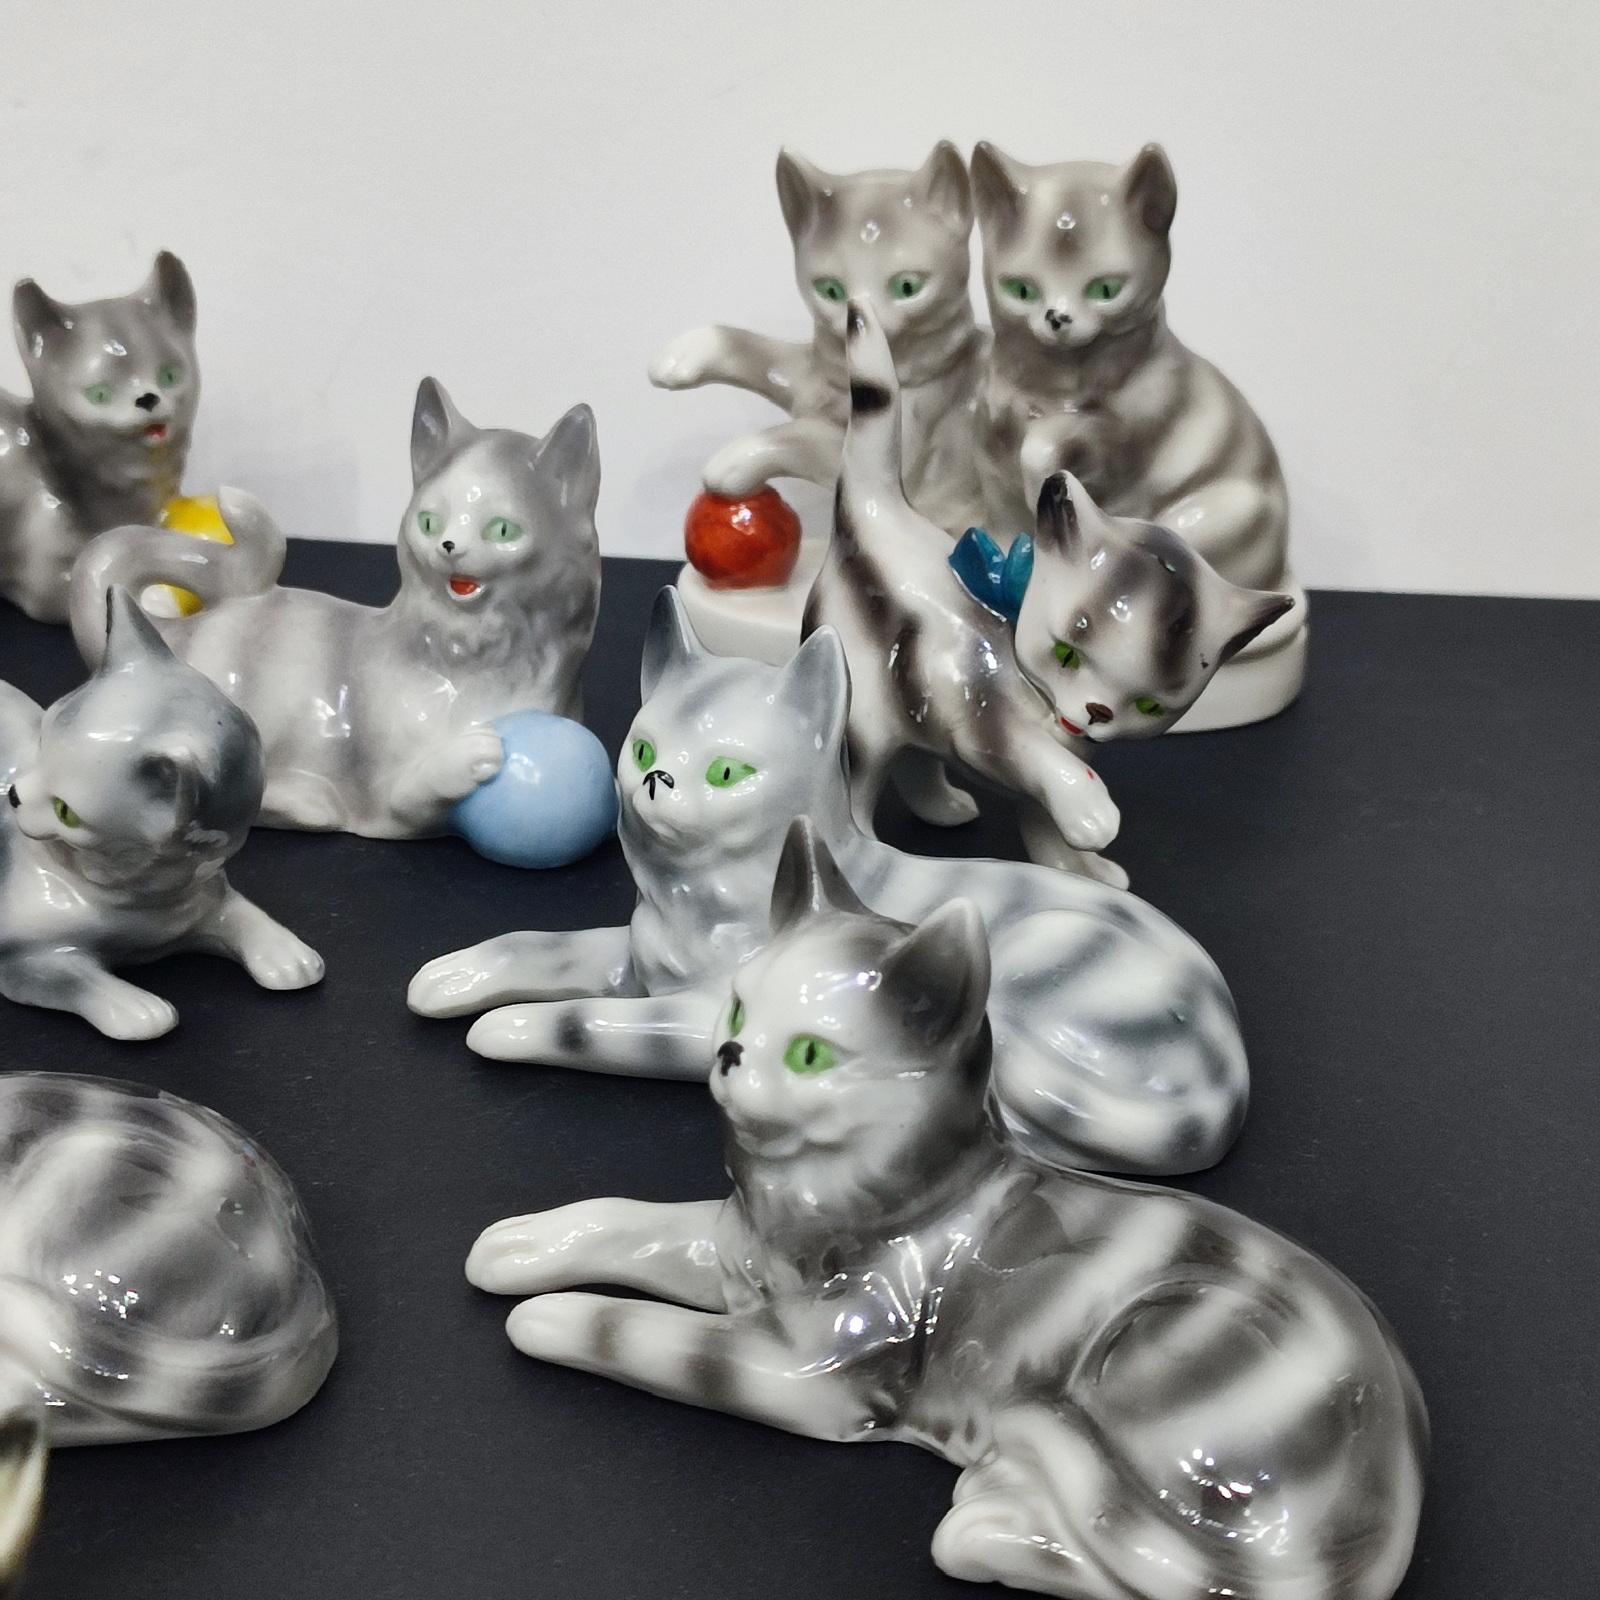 Mid-Century Modern Carl Scheidig Gräfenthal Collection of Cat Figurines, Germany 1940s For Sale